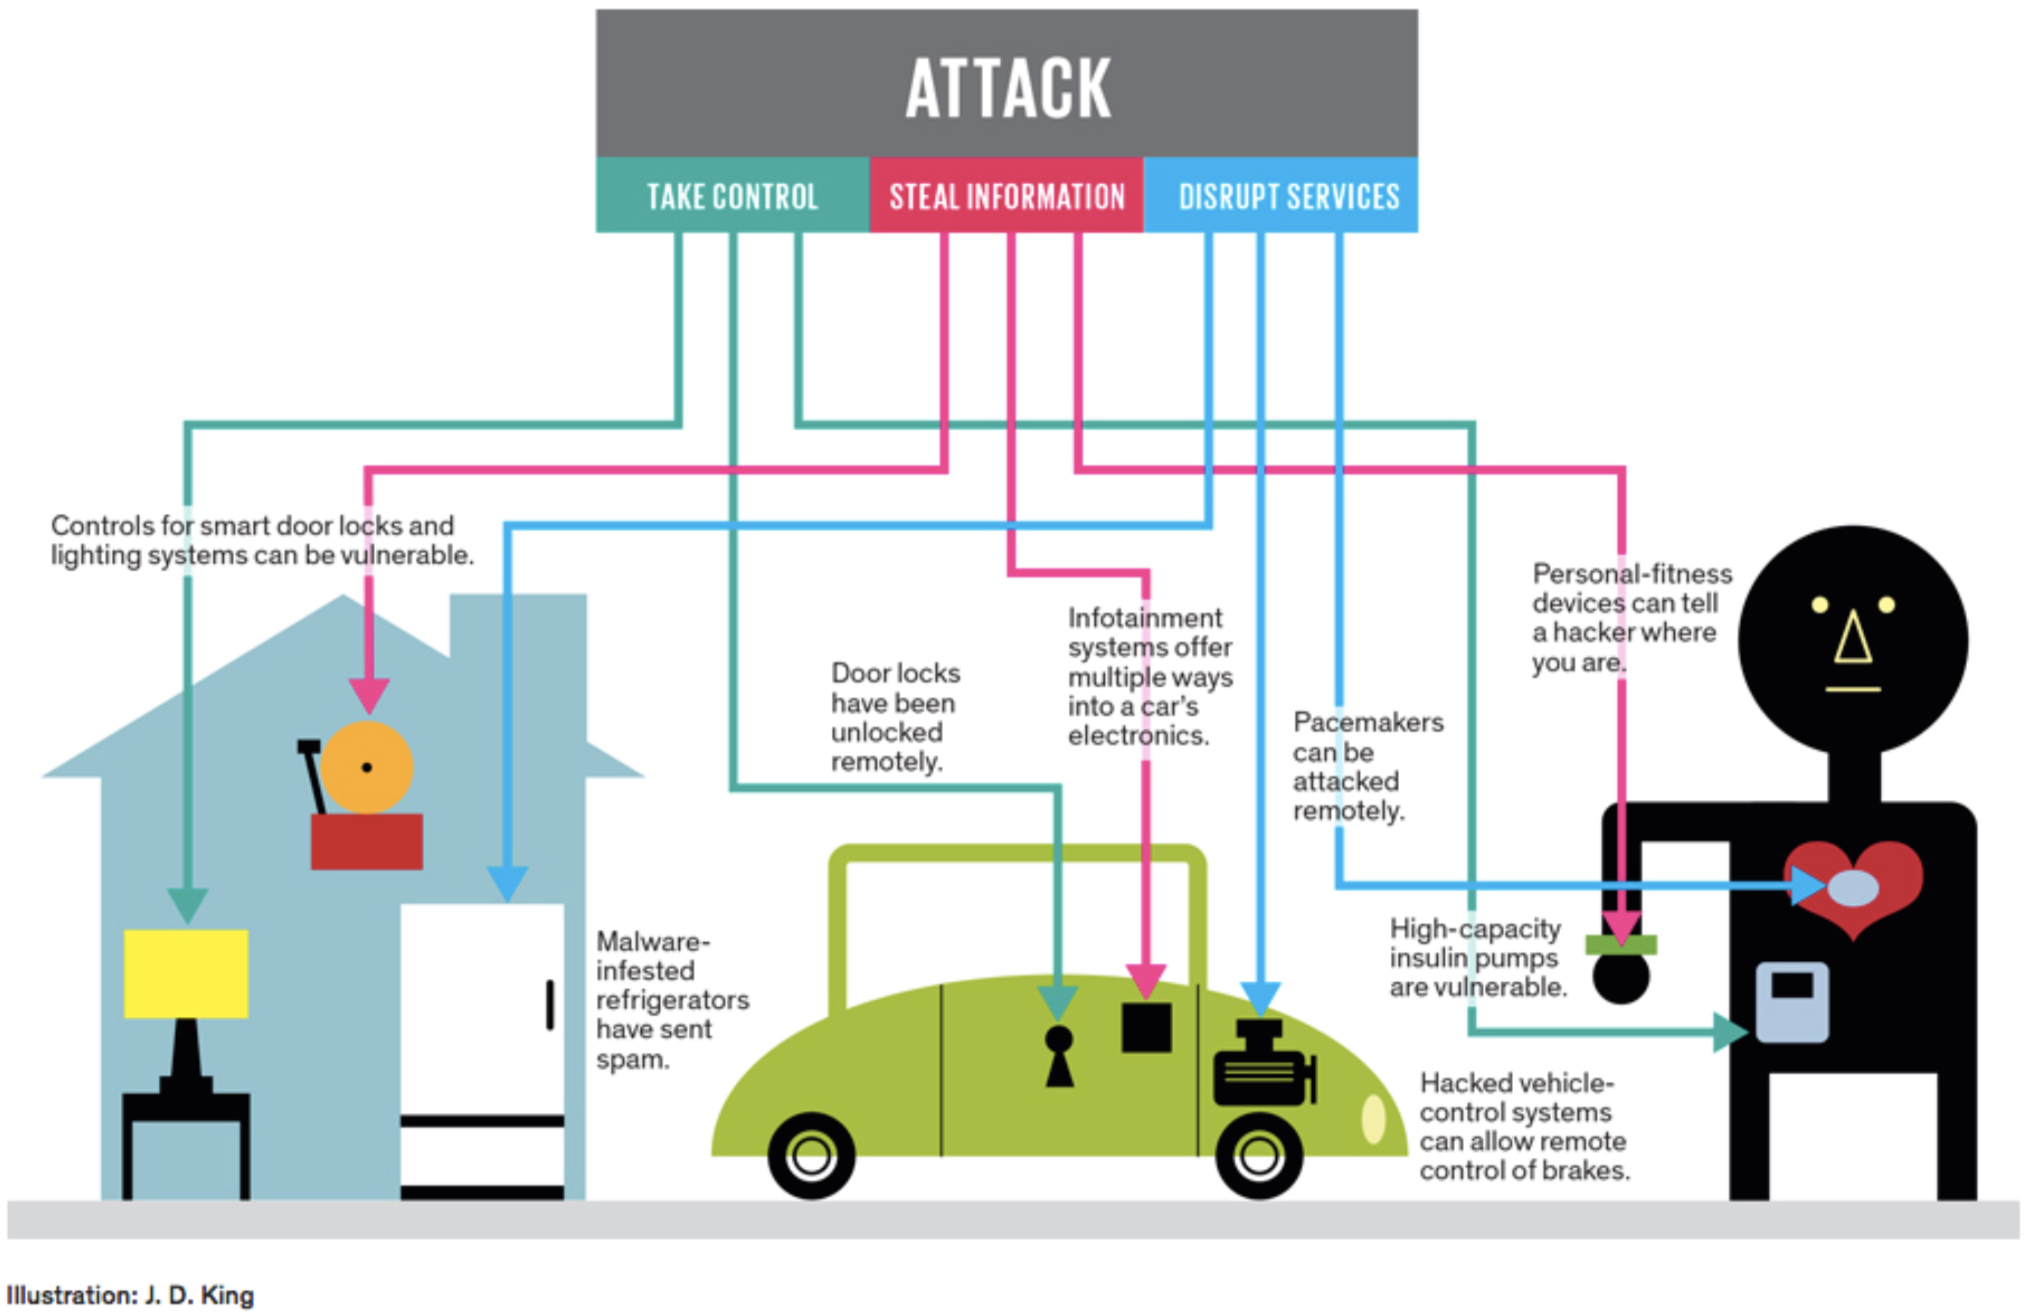 Is IoT Security a Ticking Bomb?